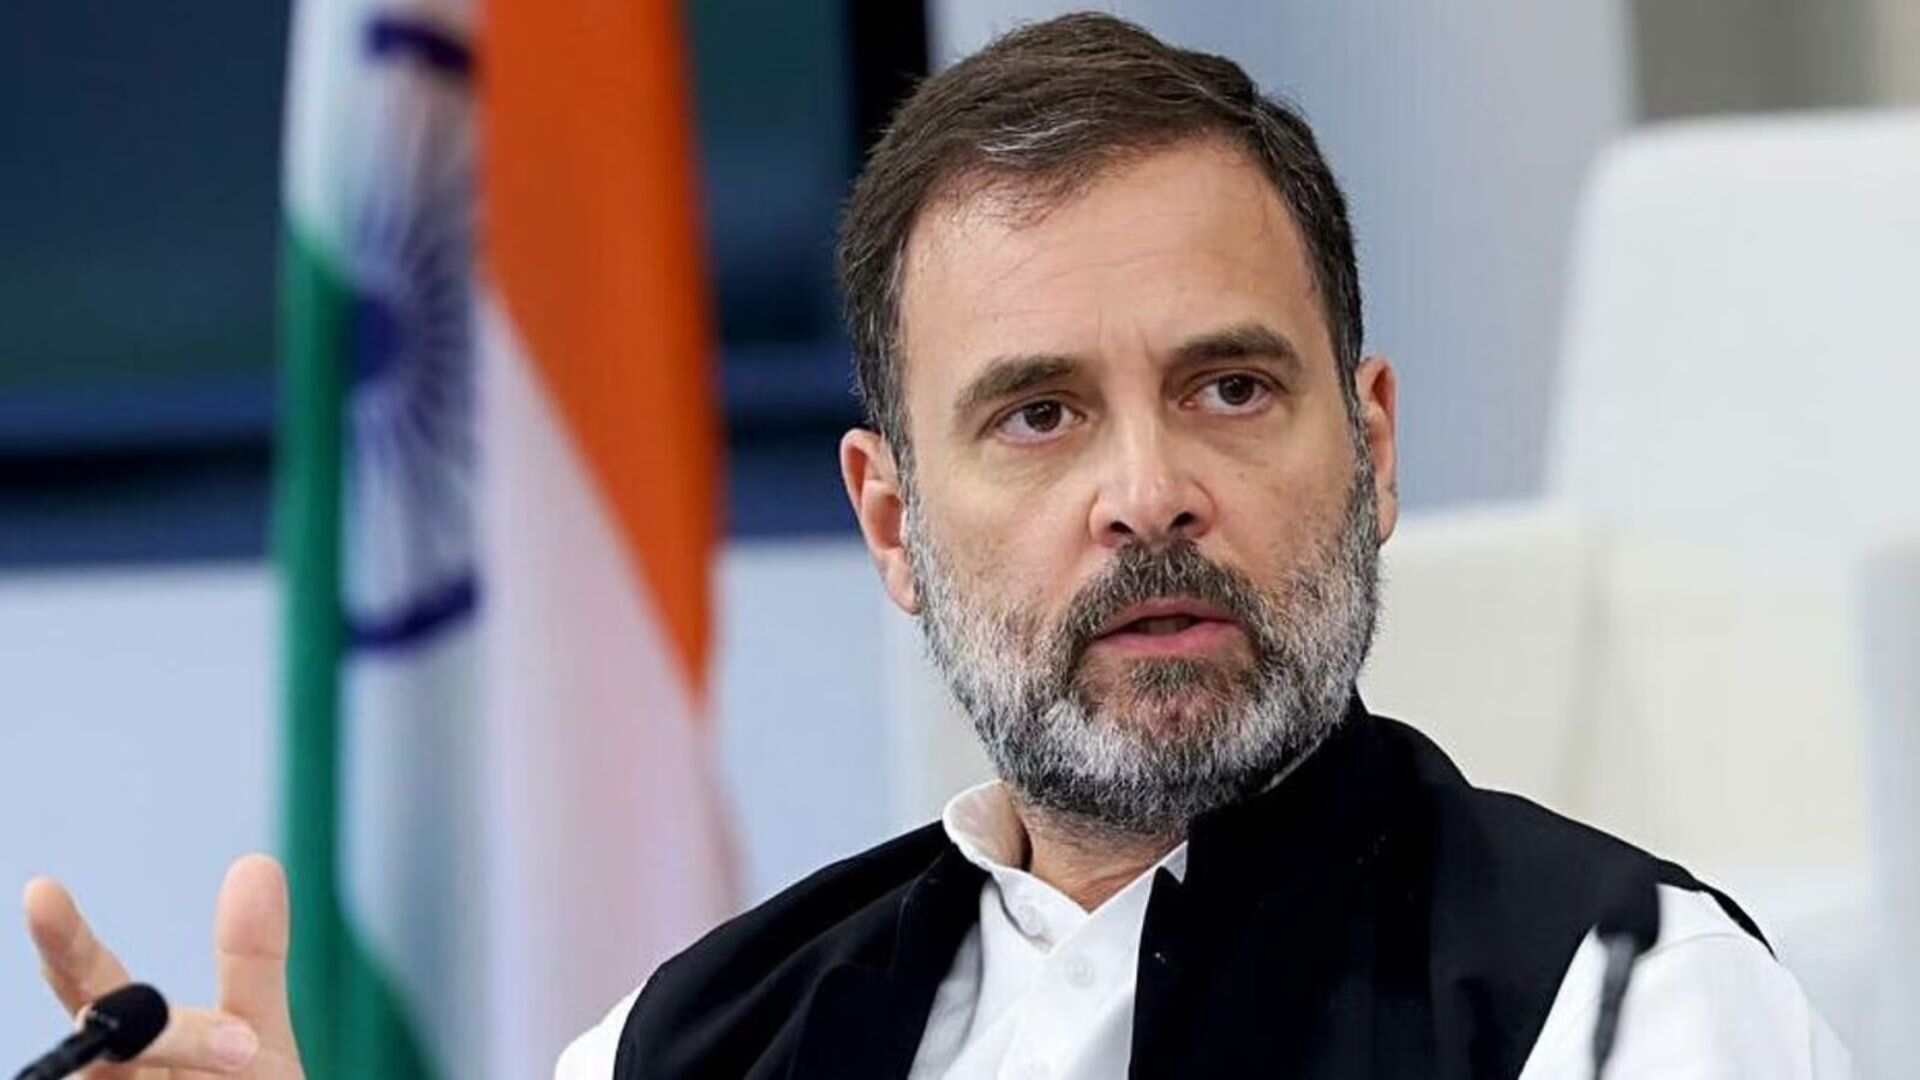 Kerala Exit Poll Forecasts Significant Drop In Rahul Gandhi’s Vote Share In Wayanad